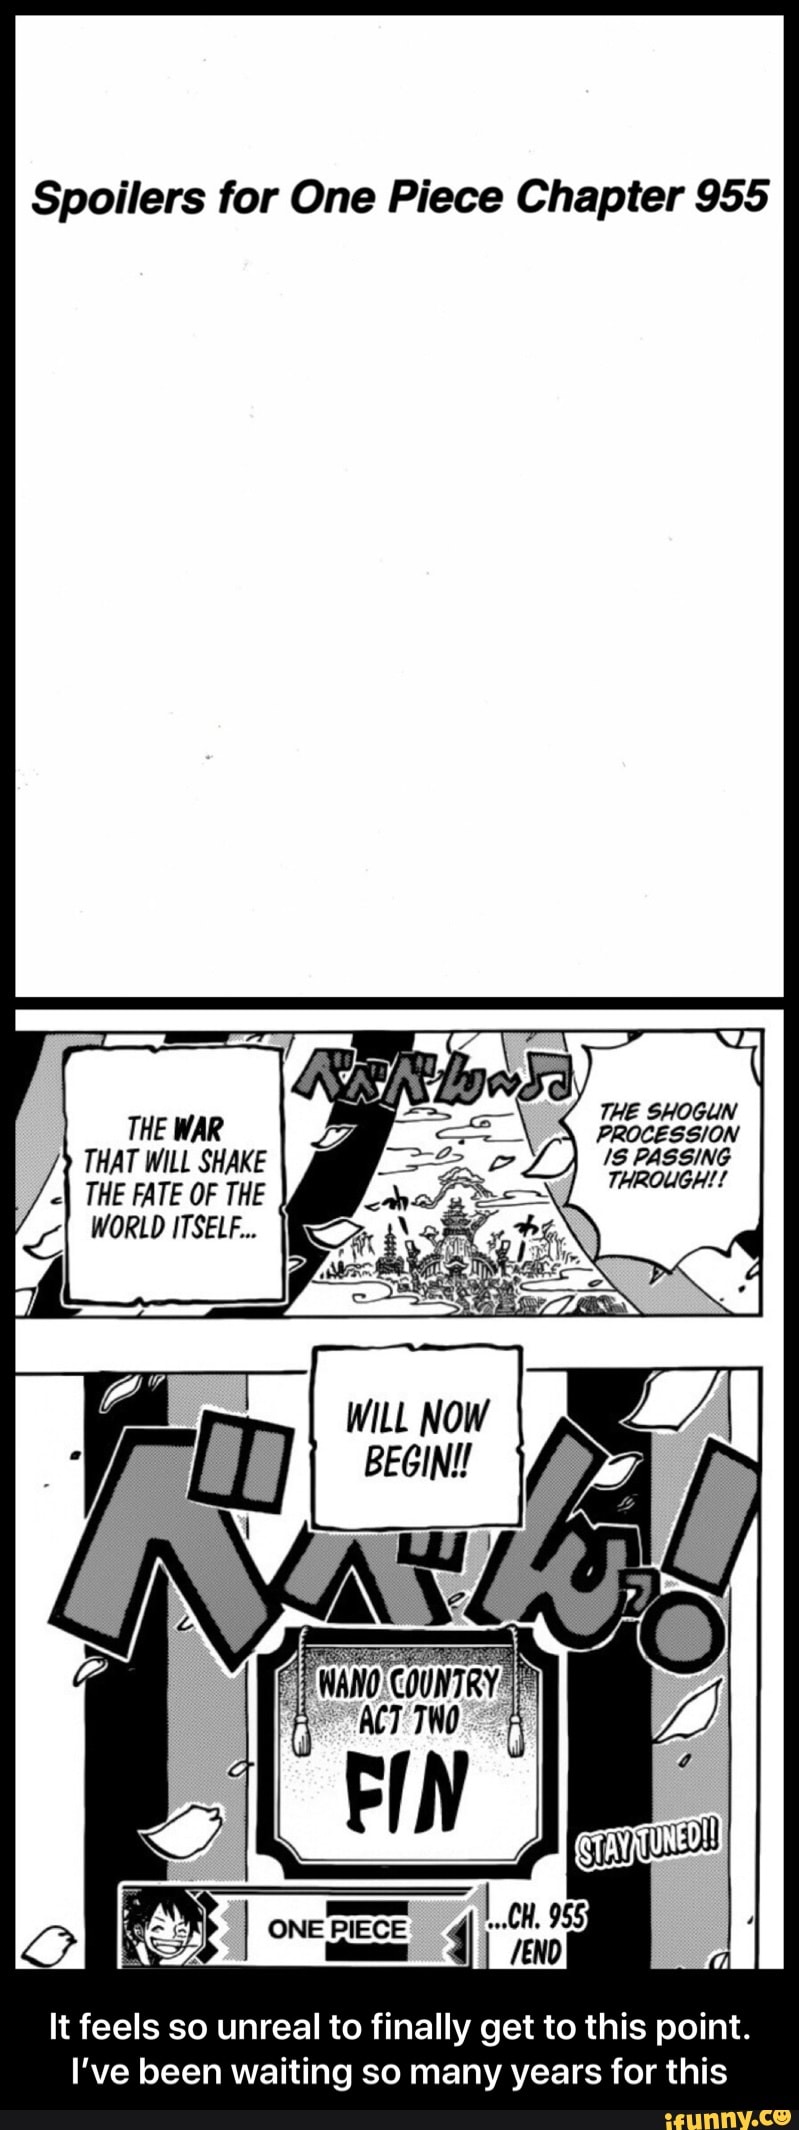 Spoilers For One Piece Chapter 955 It Feels So Unreal To Finally Get To This Point I Ve Been Waiting So Many Years For This Ifunny